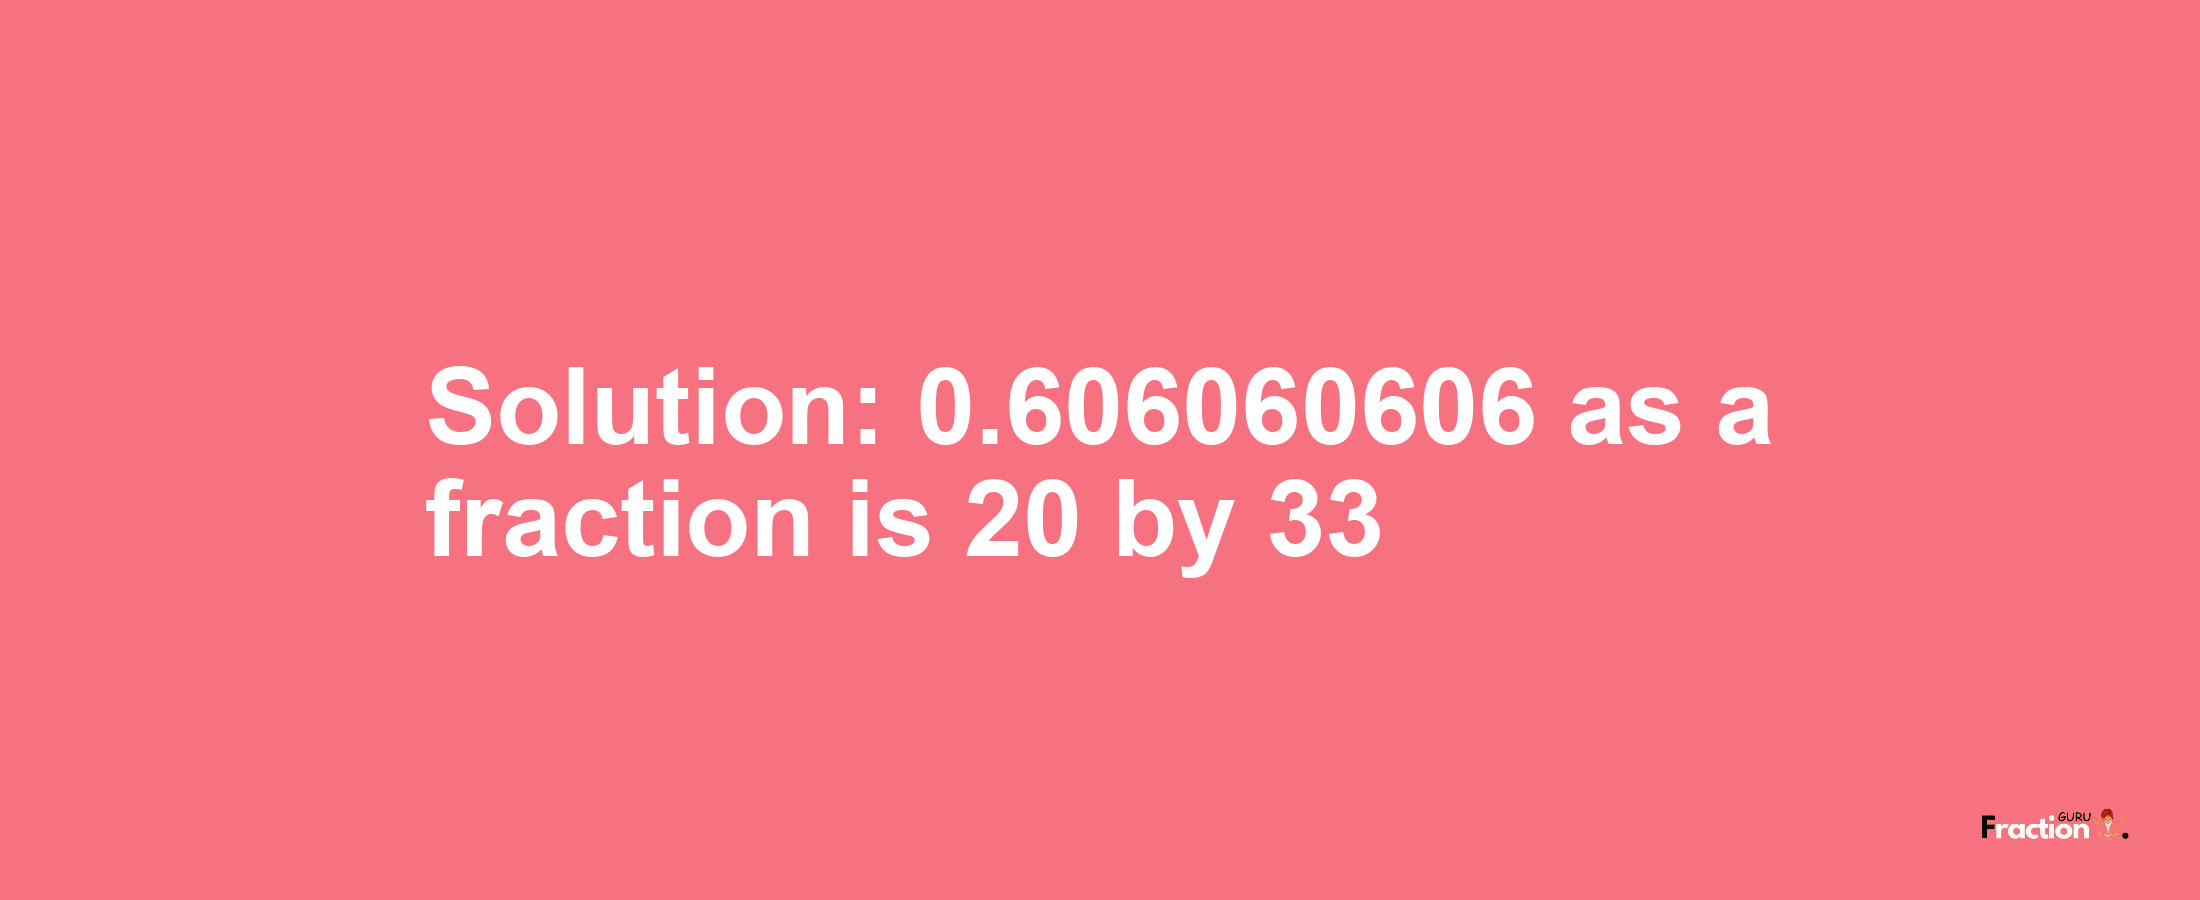 Solution:0.606060606 as a fraction is 20/33